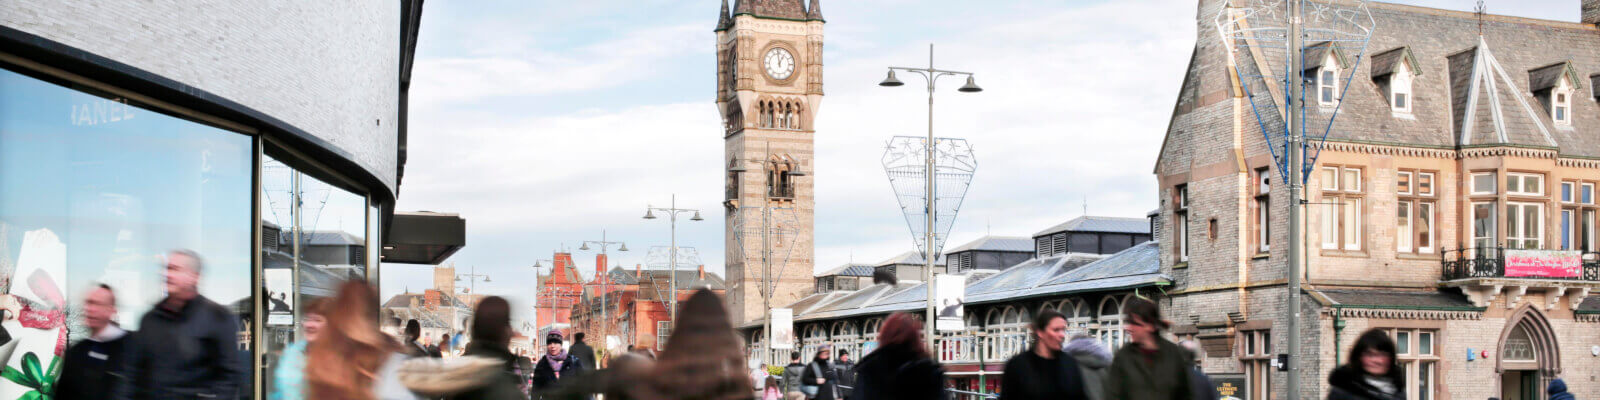 Darlington town centre people shopping with town clock in background and market hall visible on blue sky